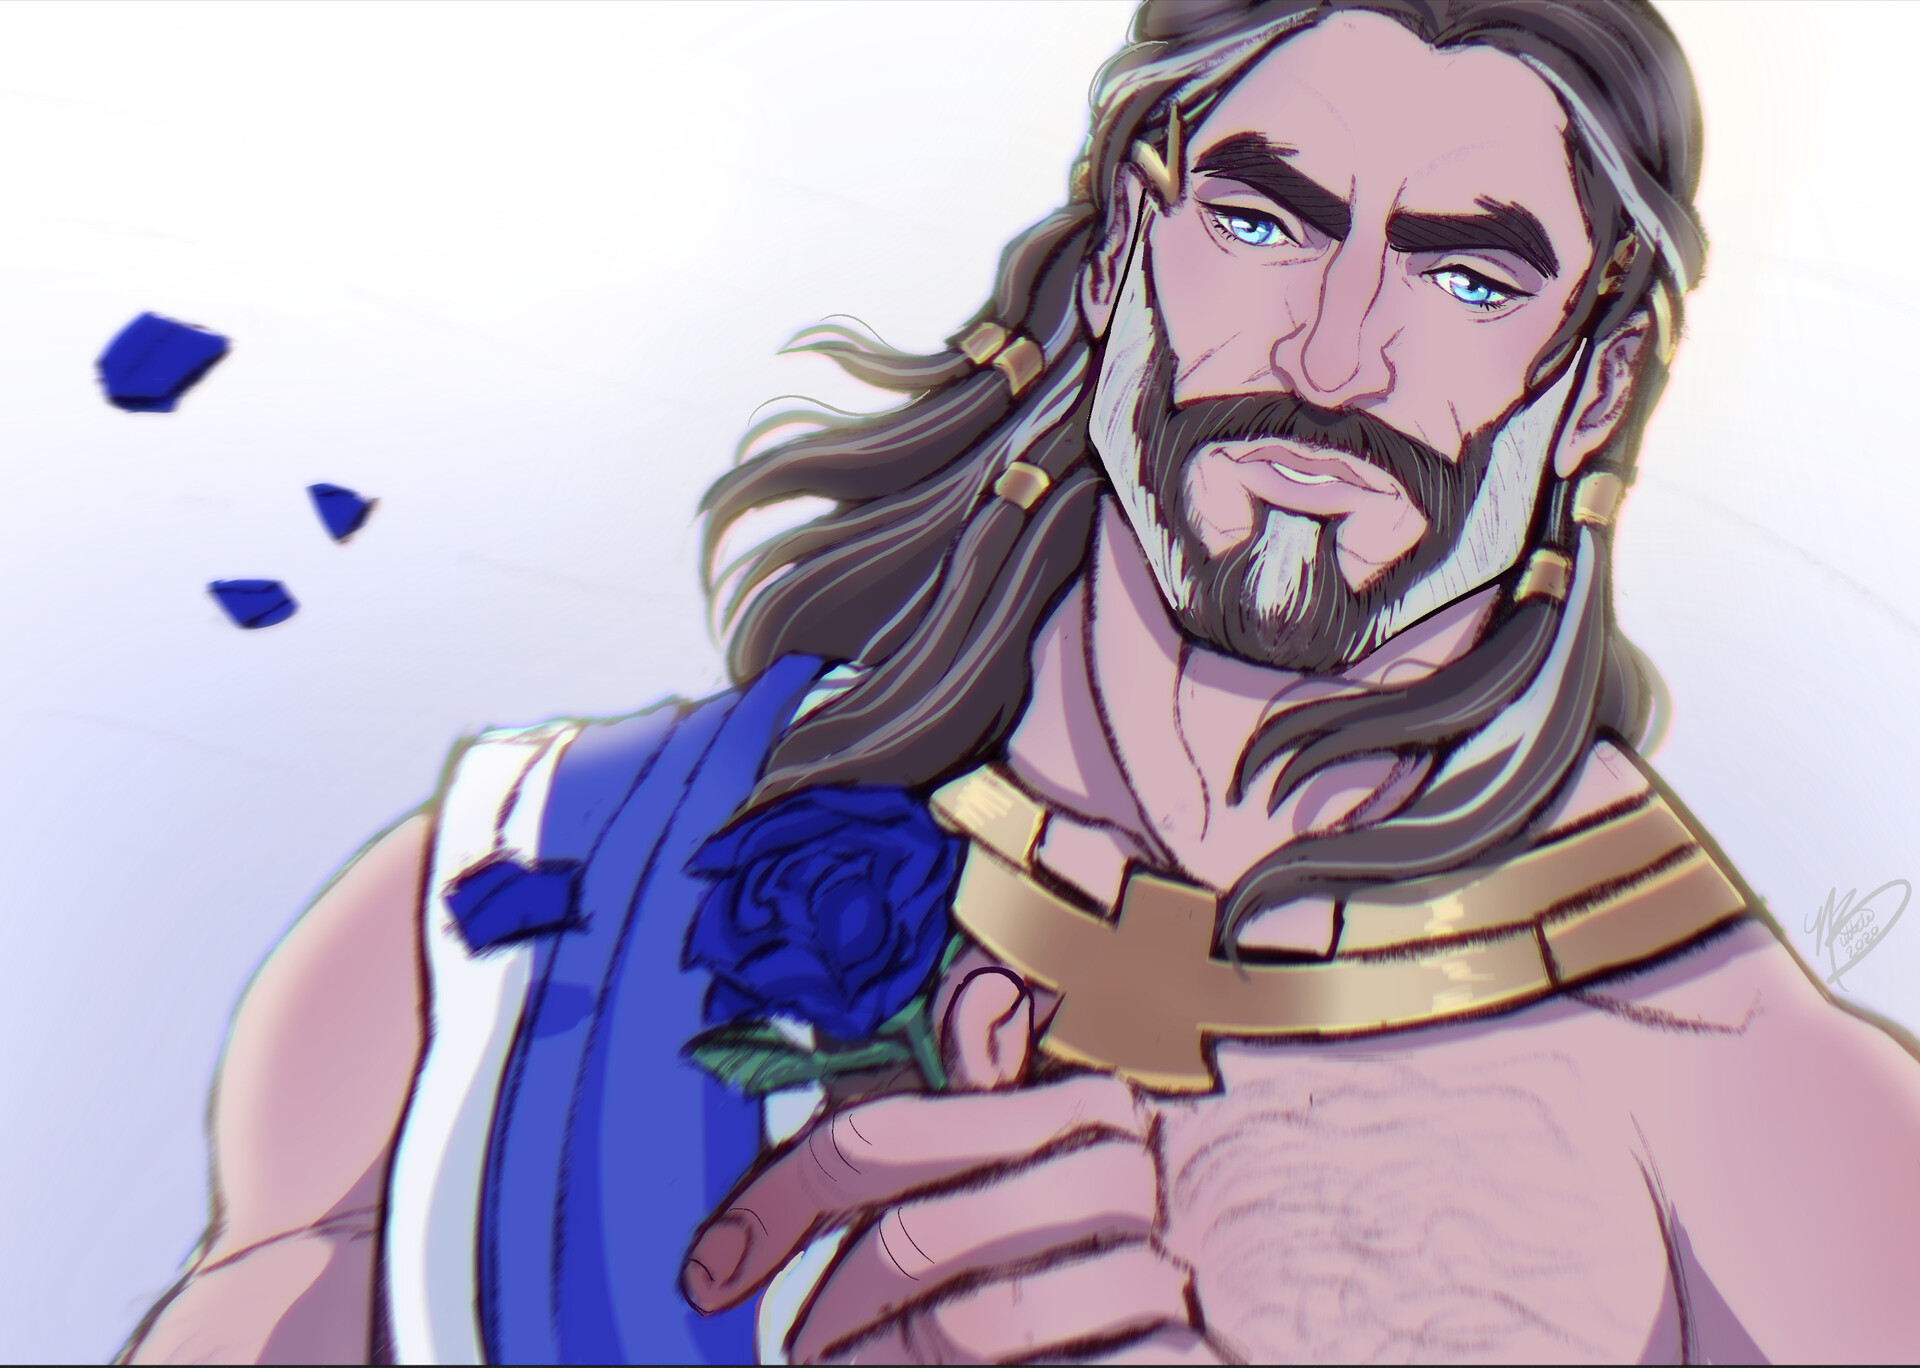 Powerhouse Animation really said “hot Zeus rights” and I will forever be gr...